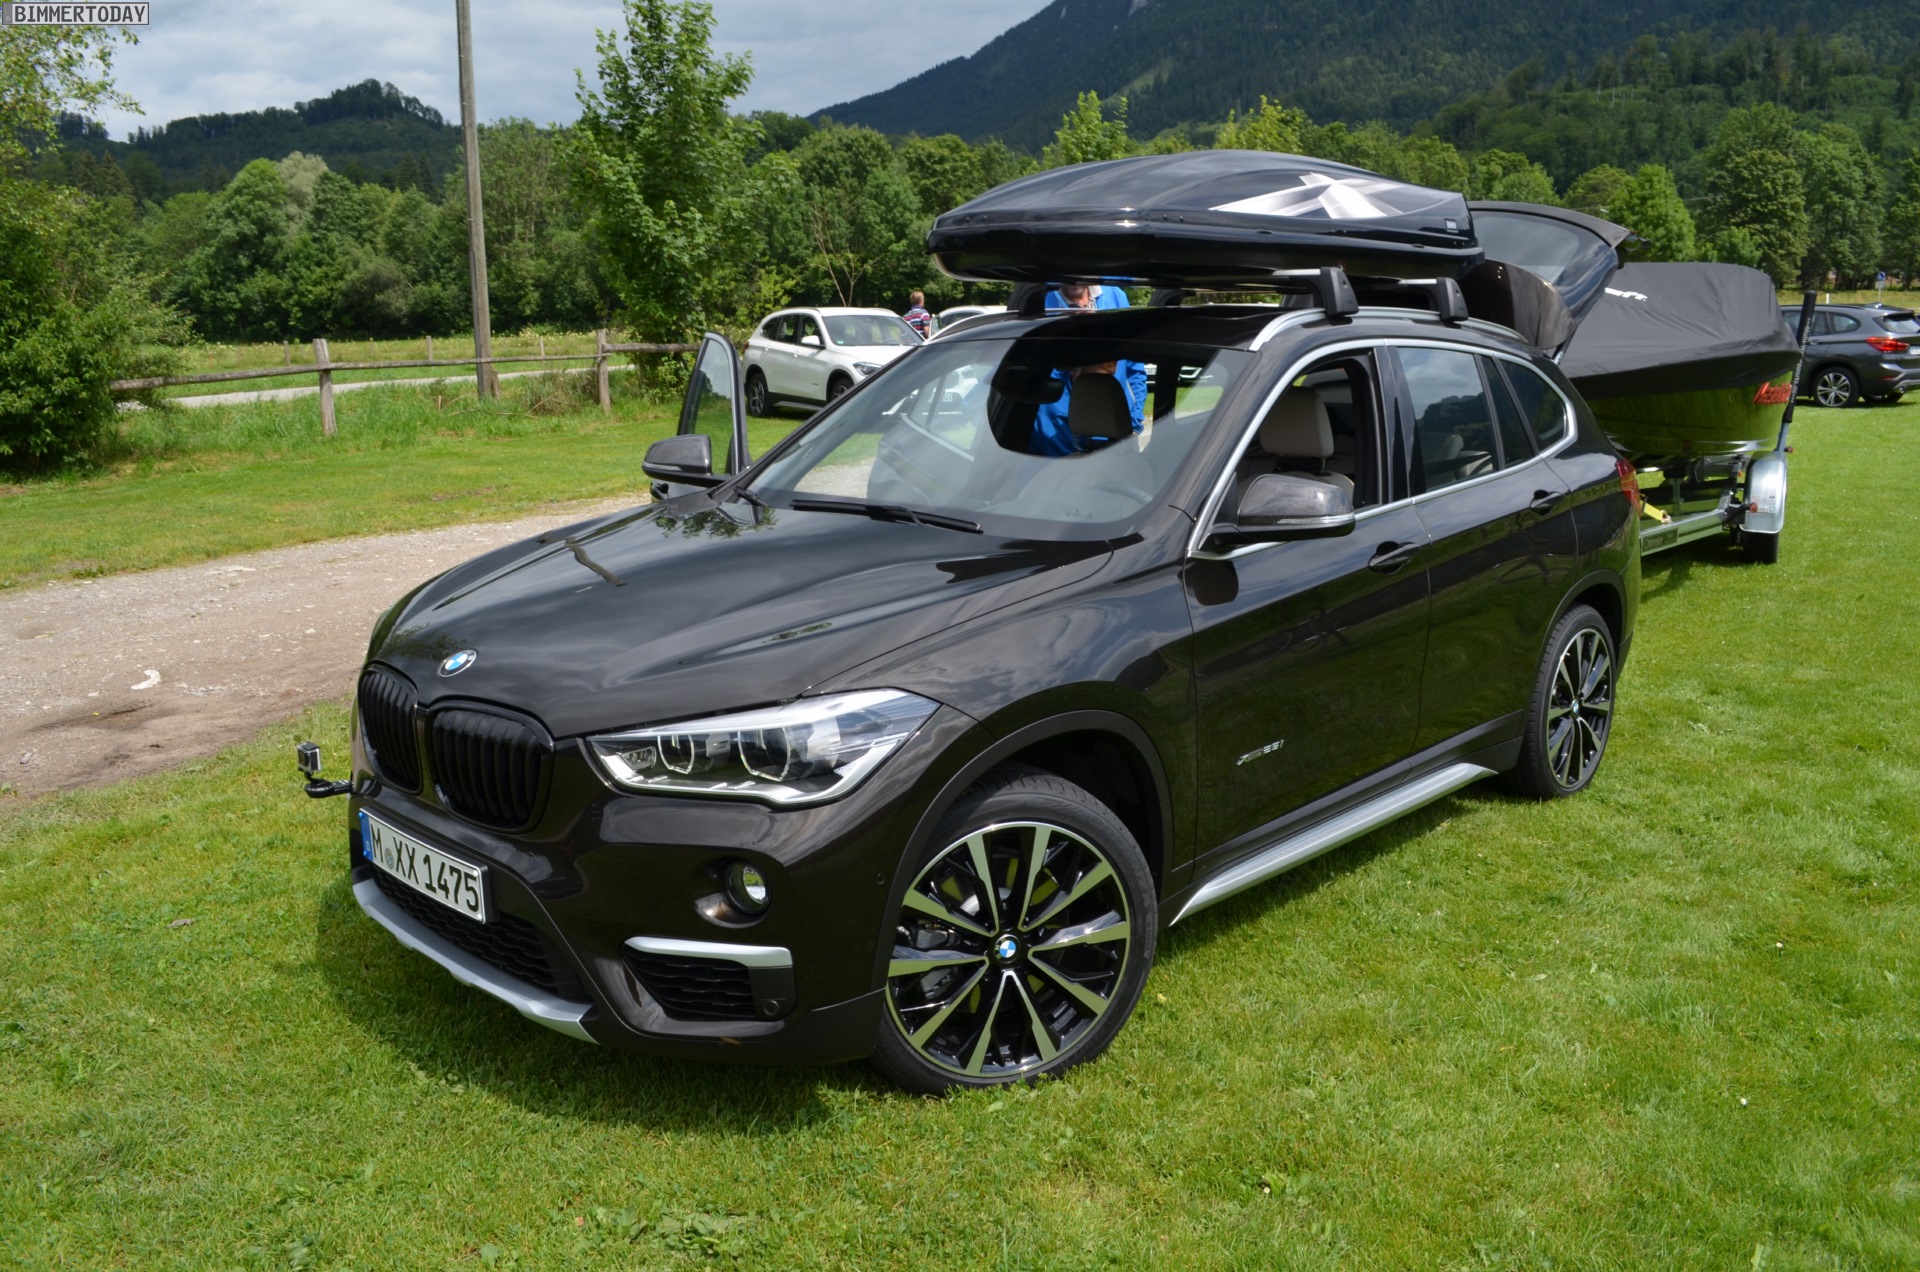 New BMW X1 can tow a 2,000 kg boat